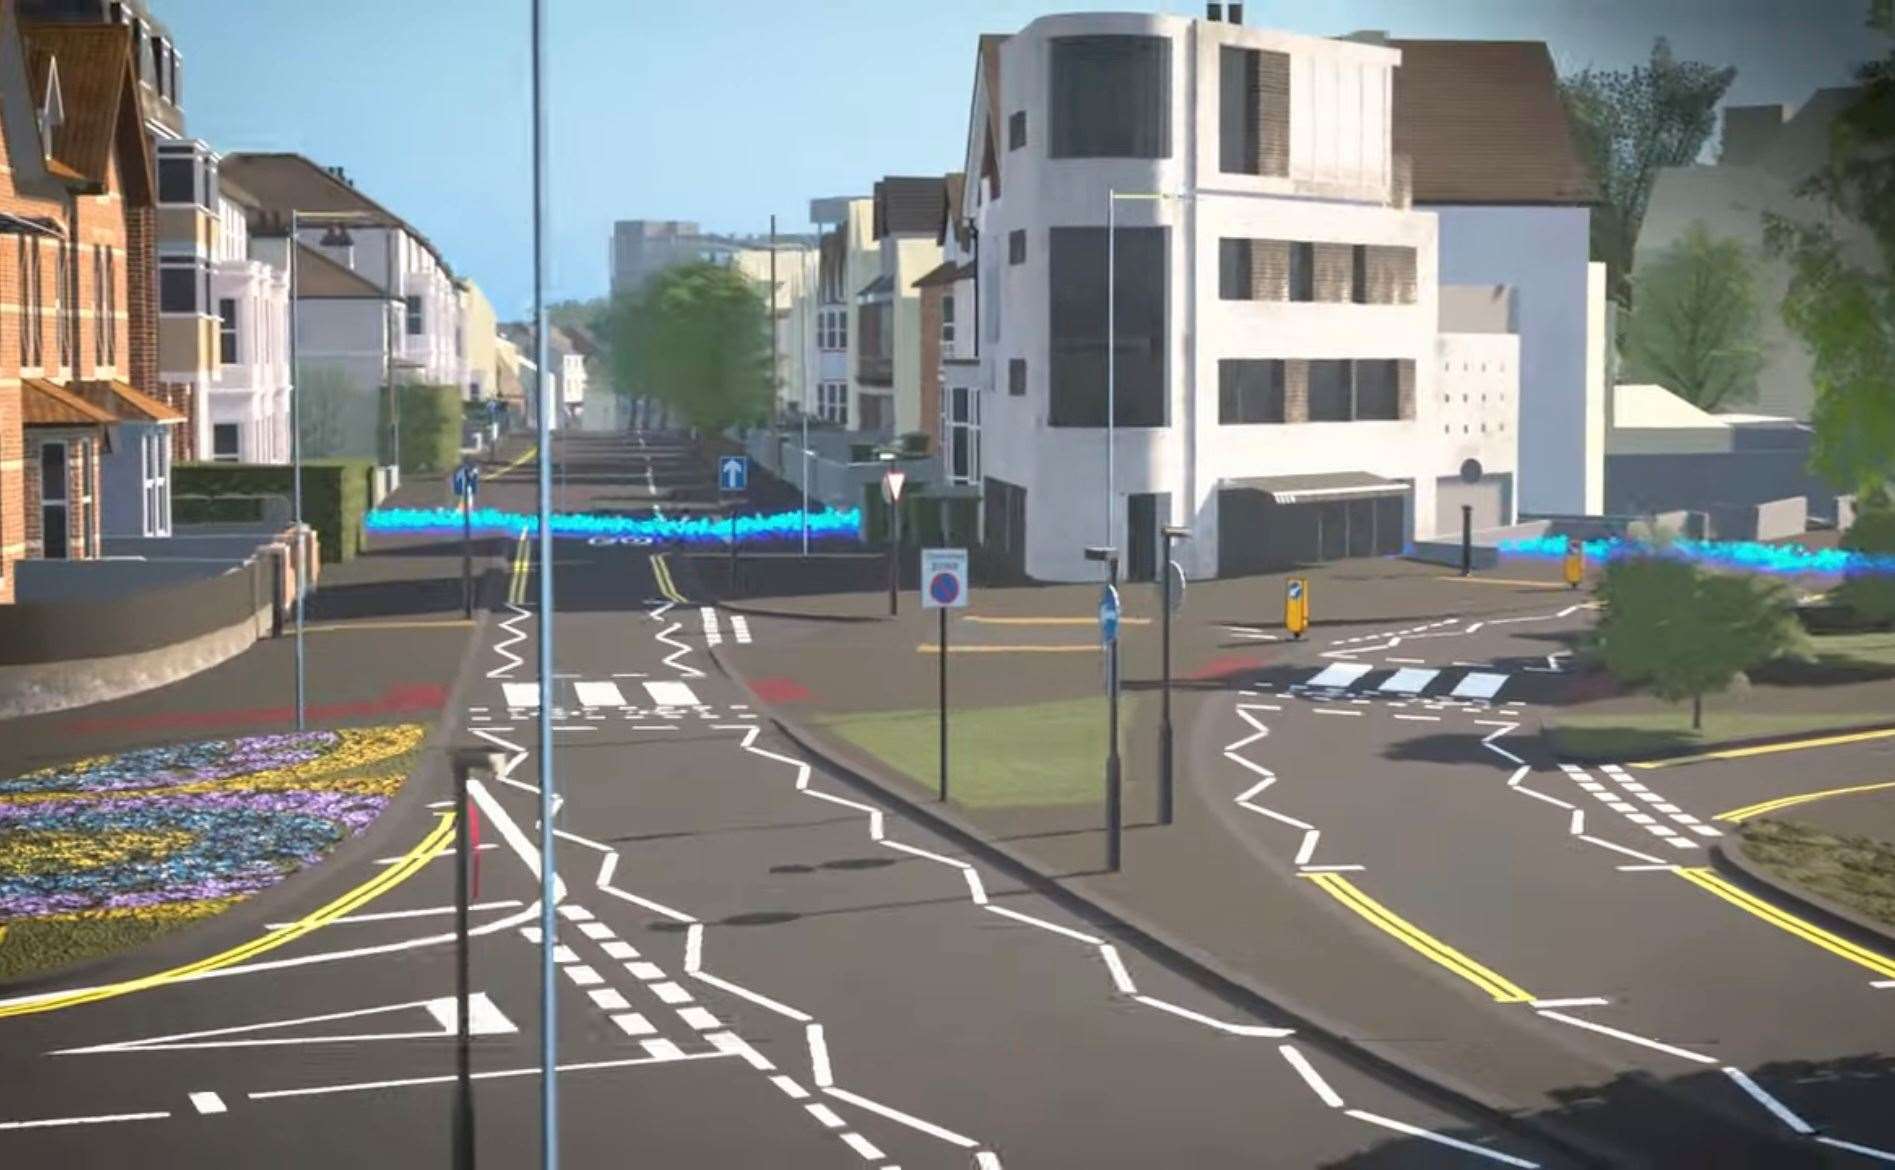 Plans for a new roundabout at the junction of Cheriton Road and Cheriton Gardens have now been scrapped. Picture: FHDC